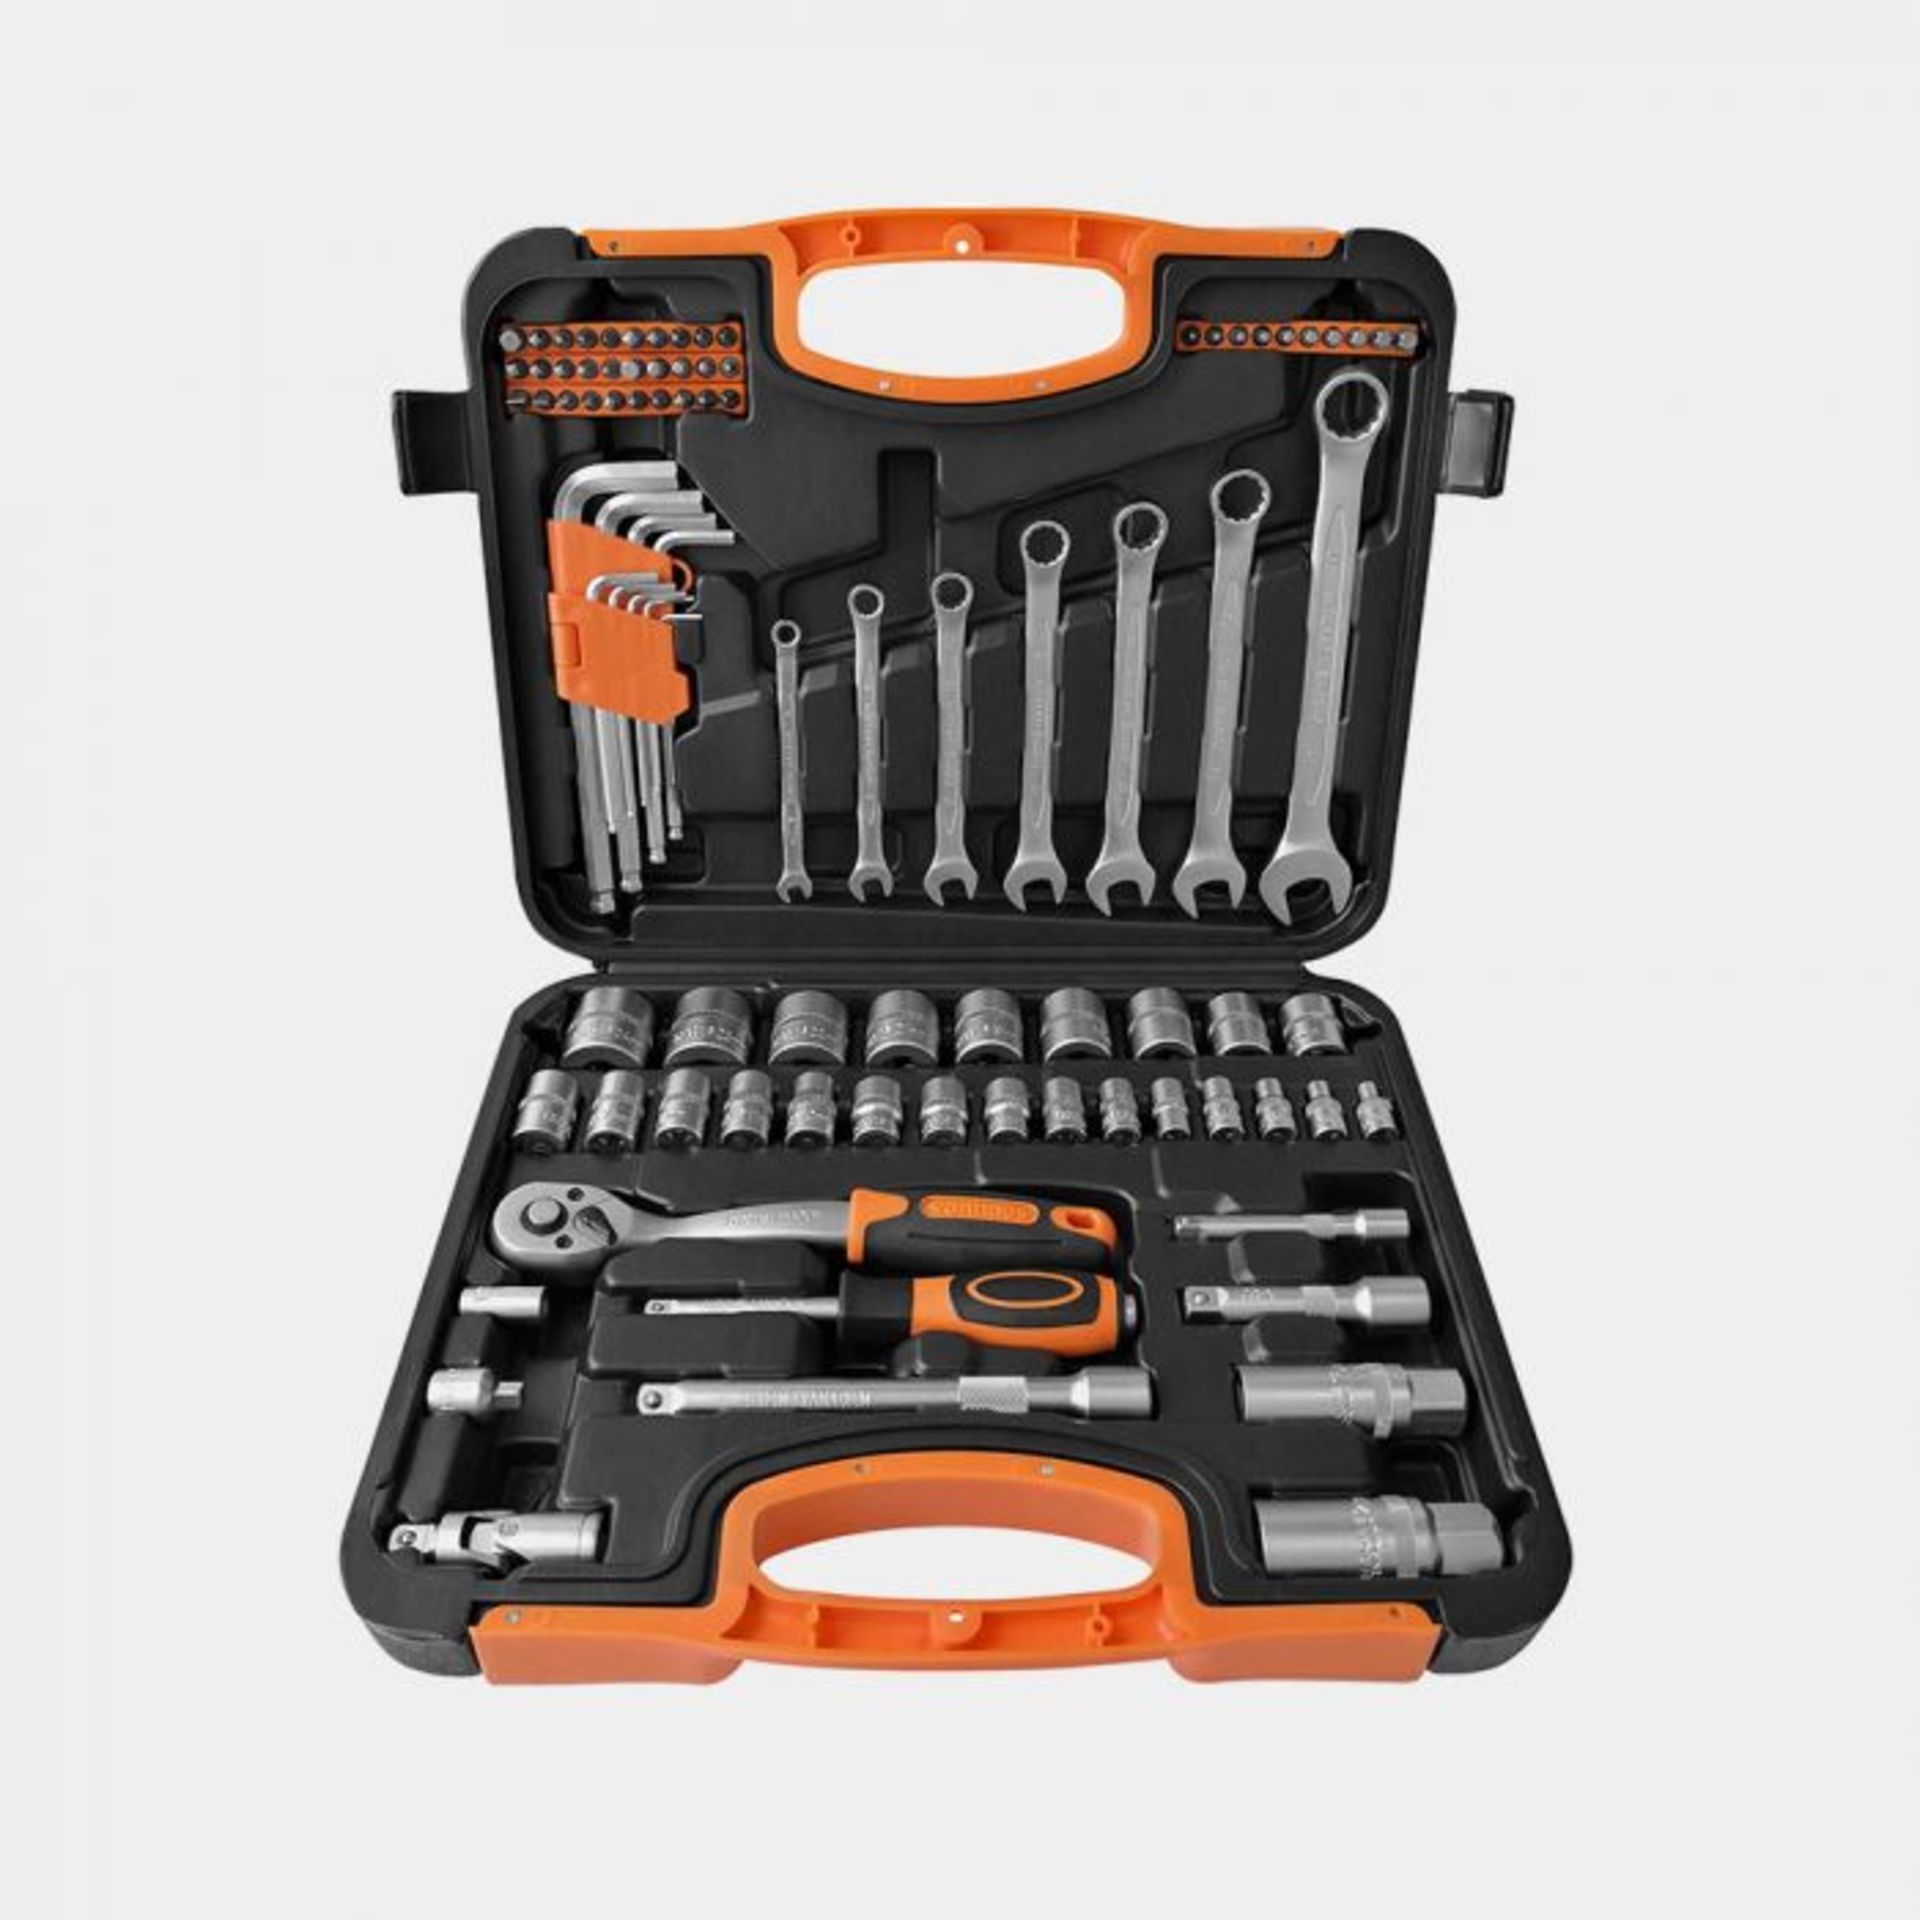 New Boxed - 90pc Socket Set. Row 3. Our comprehensive 90pc Socket Set is ideal for a DIY